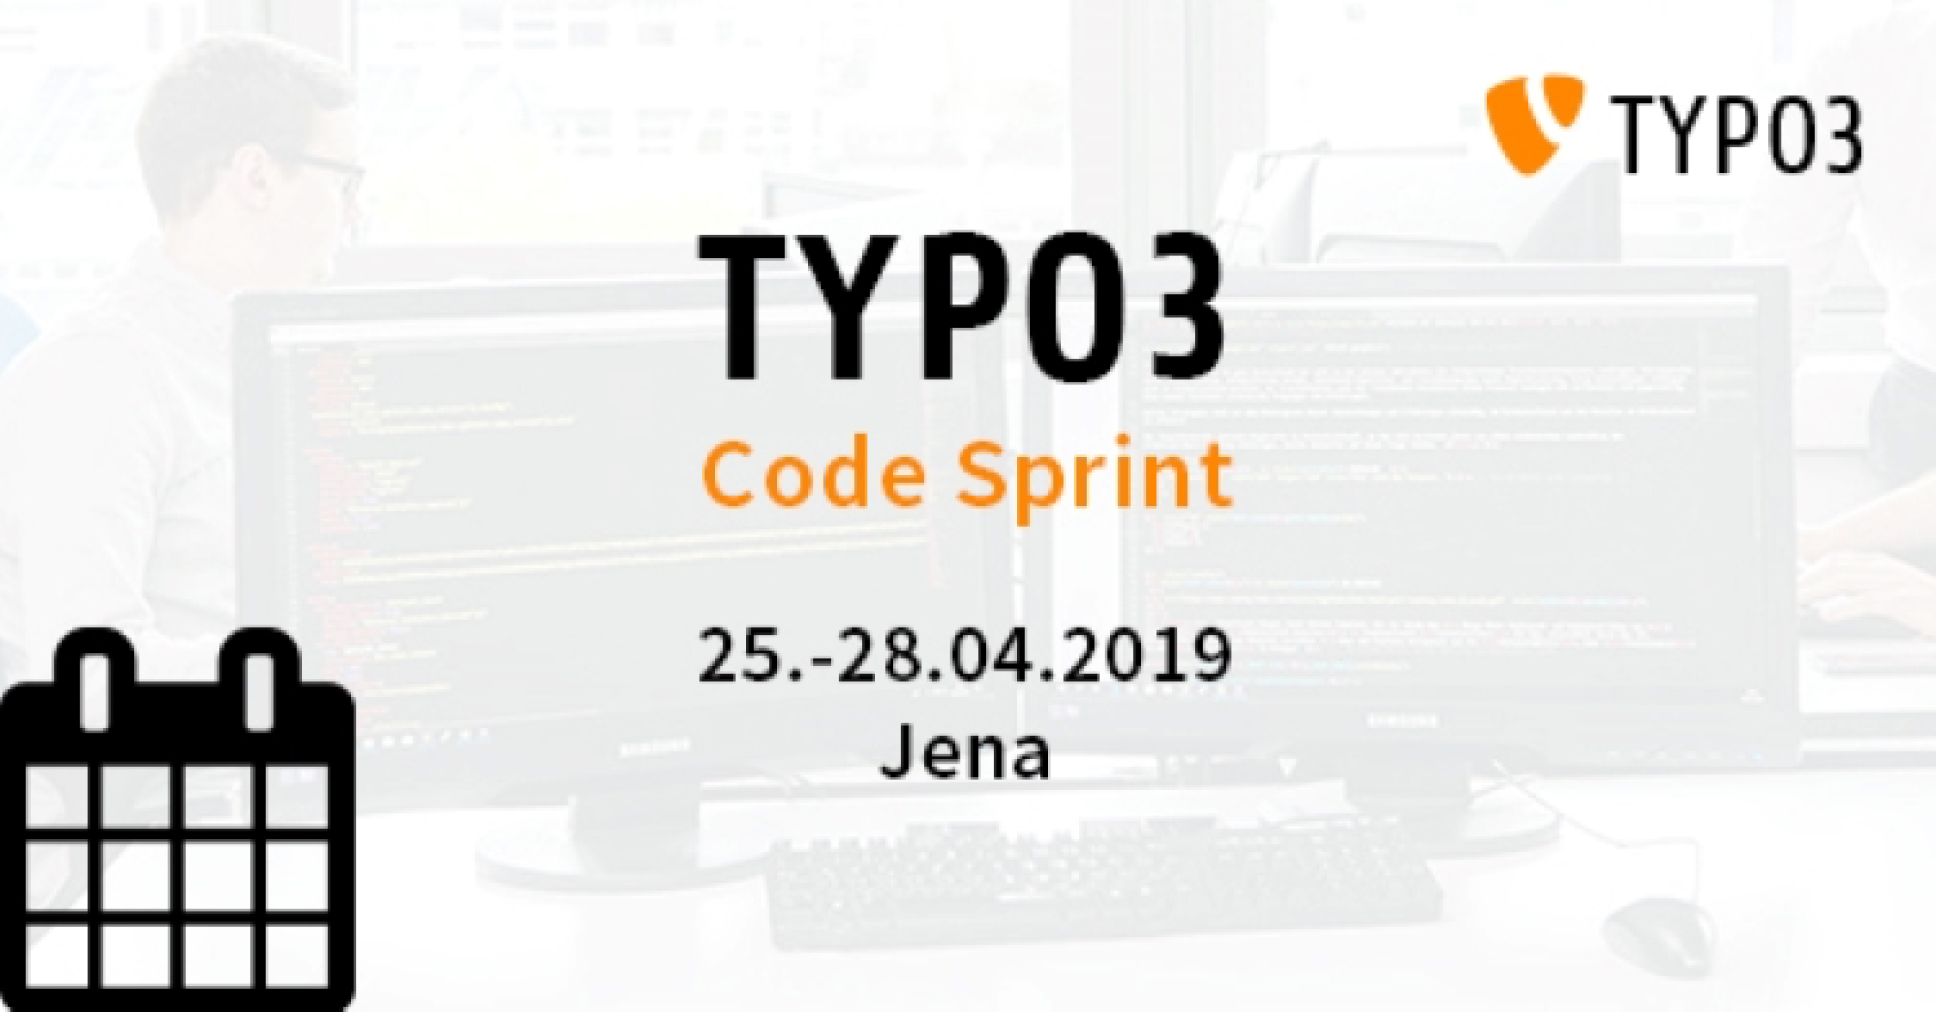 Forming the Awesome: TYPO3 Form Code Sprint in Jena